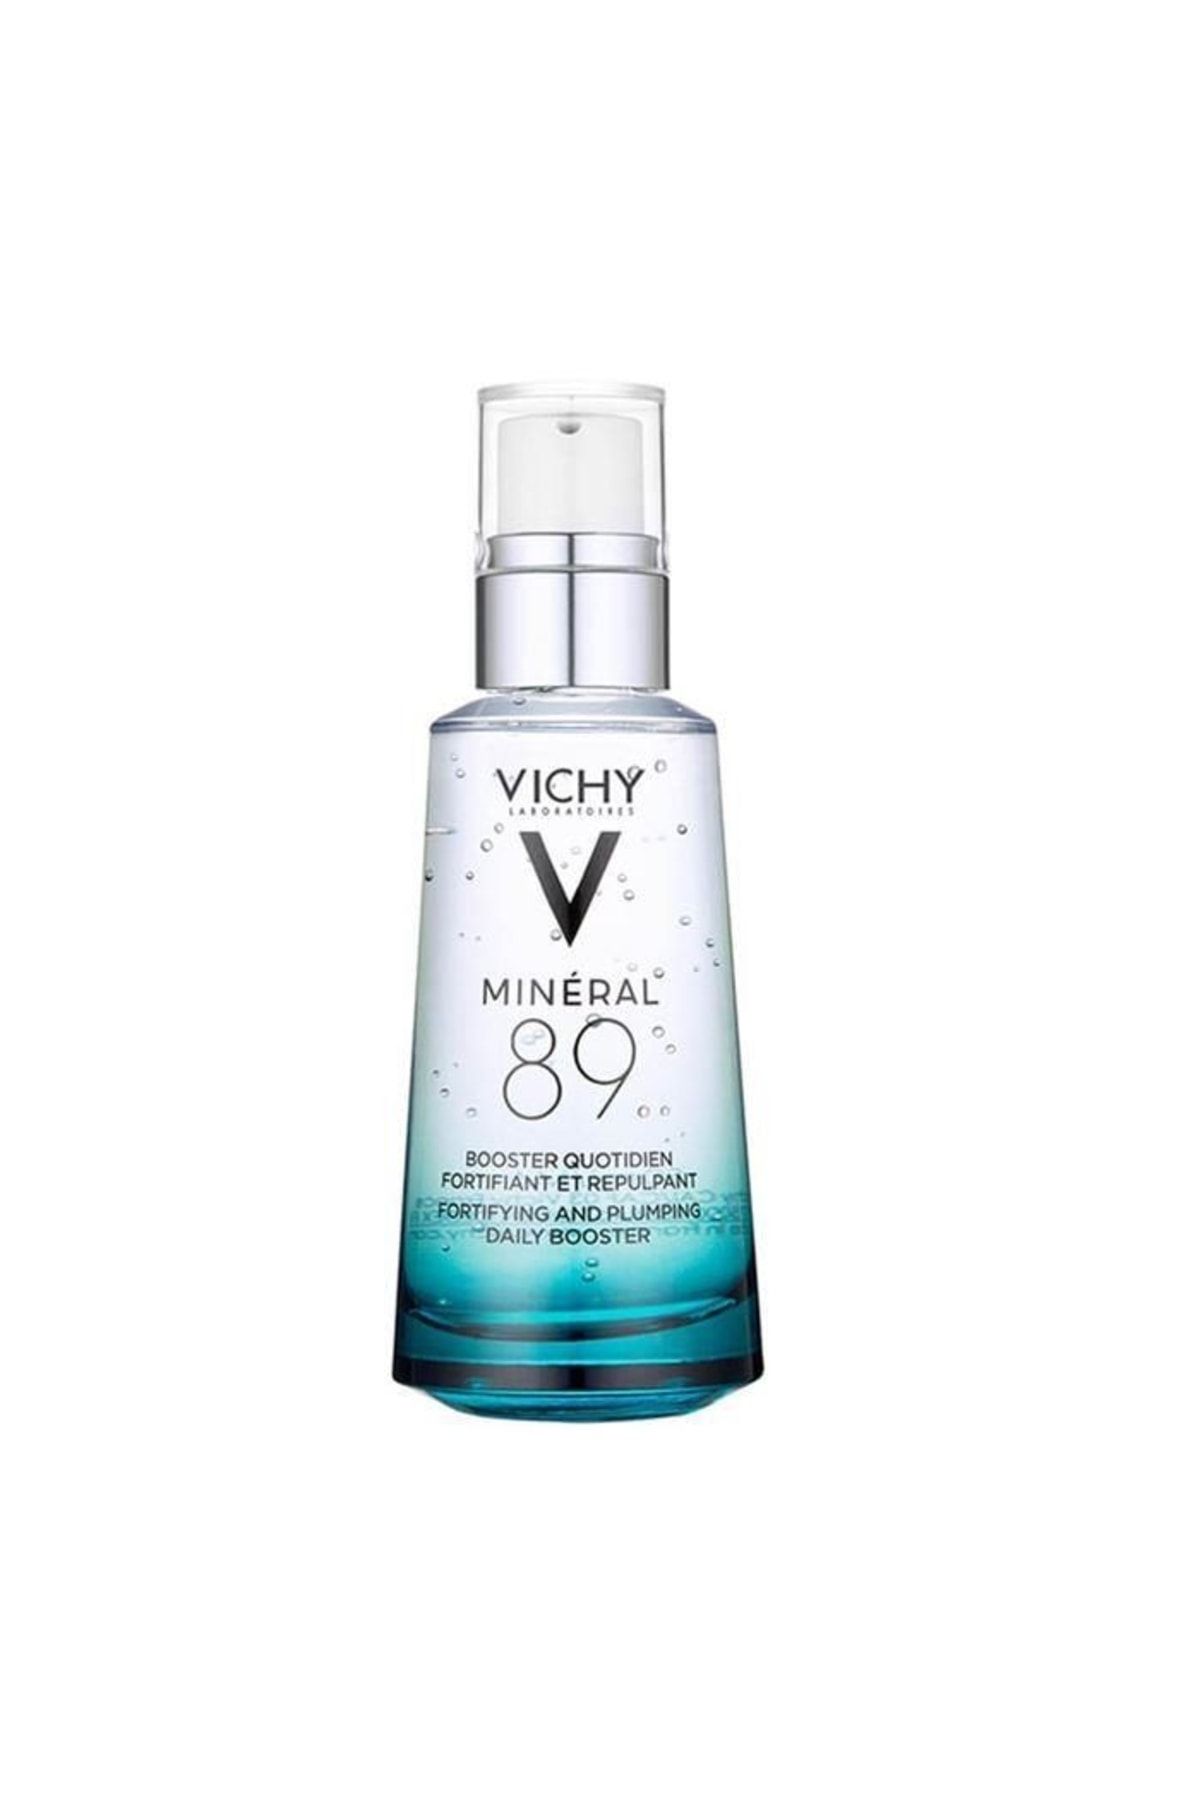 Vichy Mineral 89 Fortifying And Plumping Daily Booster 50 ml